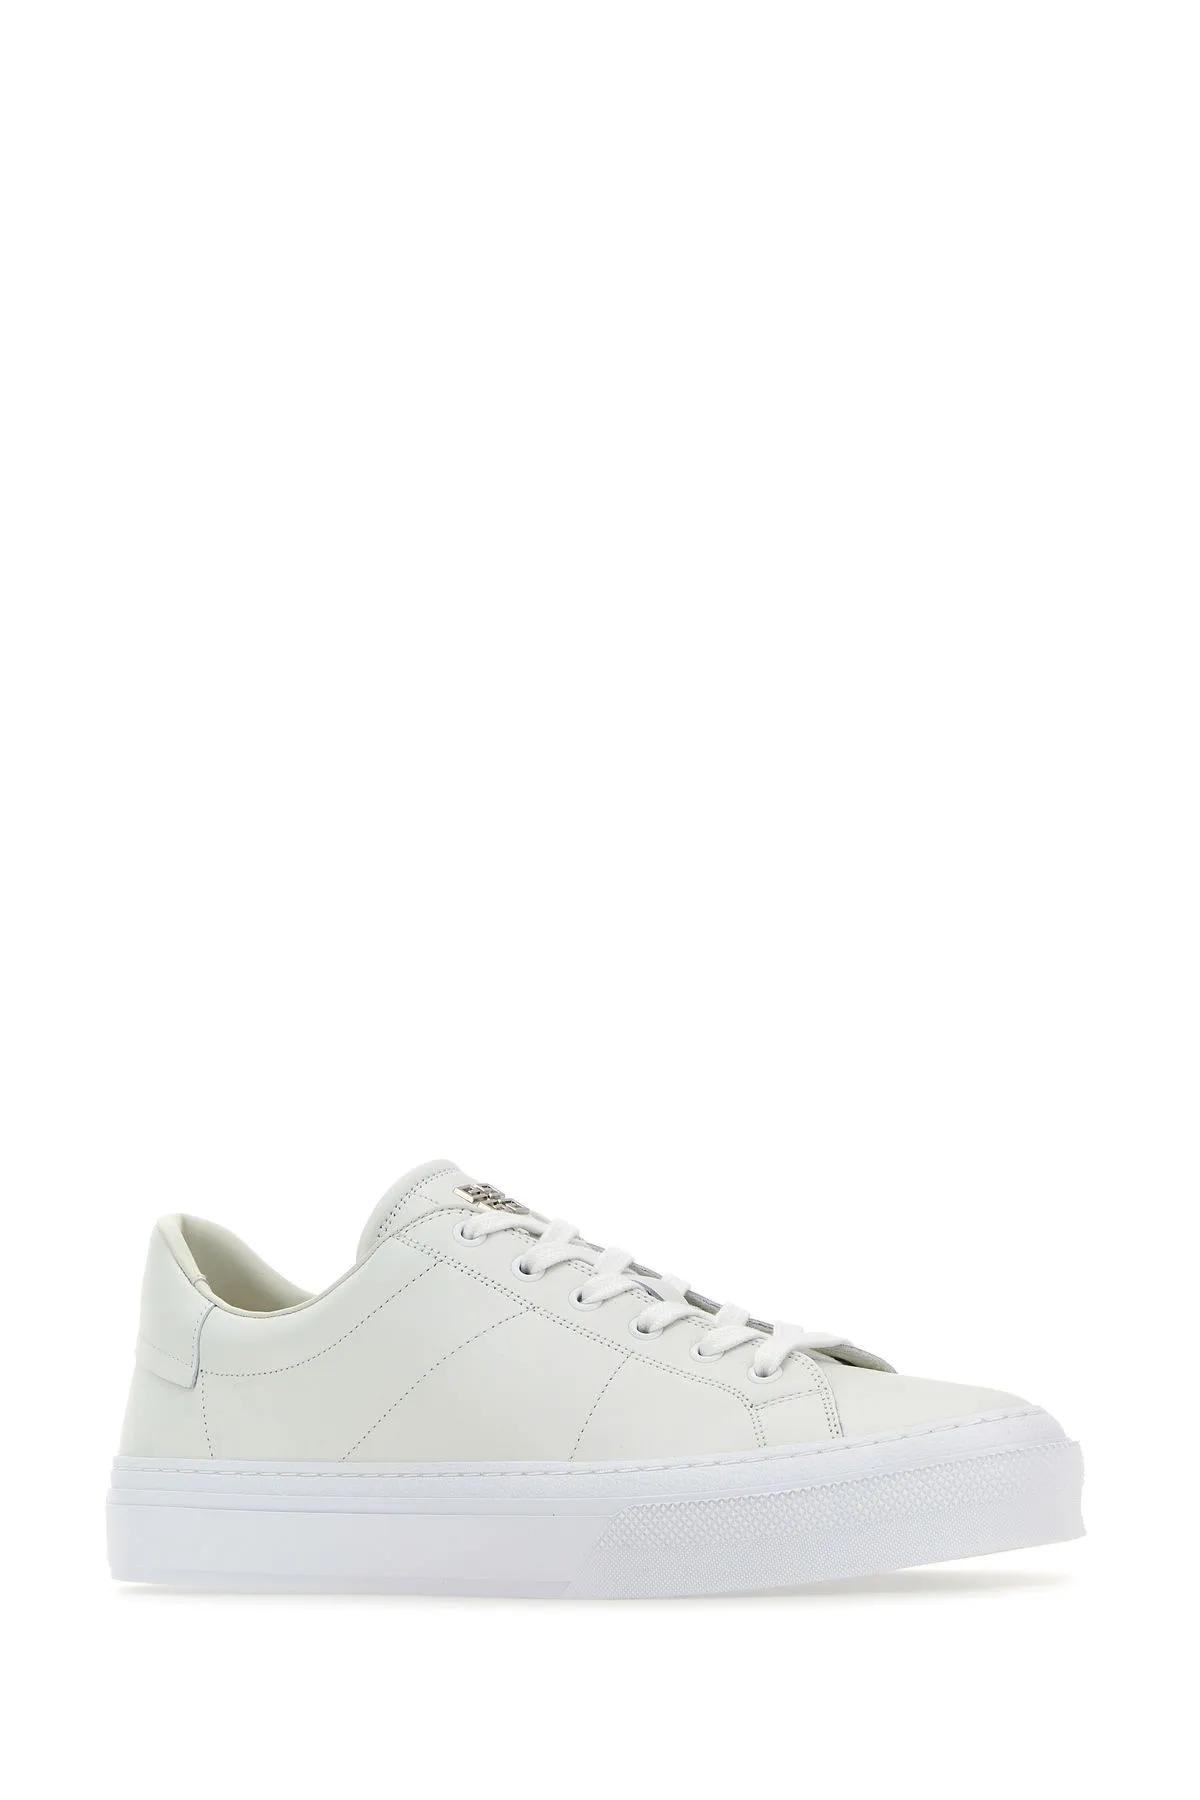 Shop Givenchy White Leather City Sport Sneakers